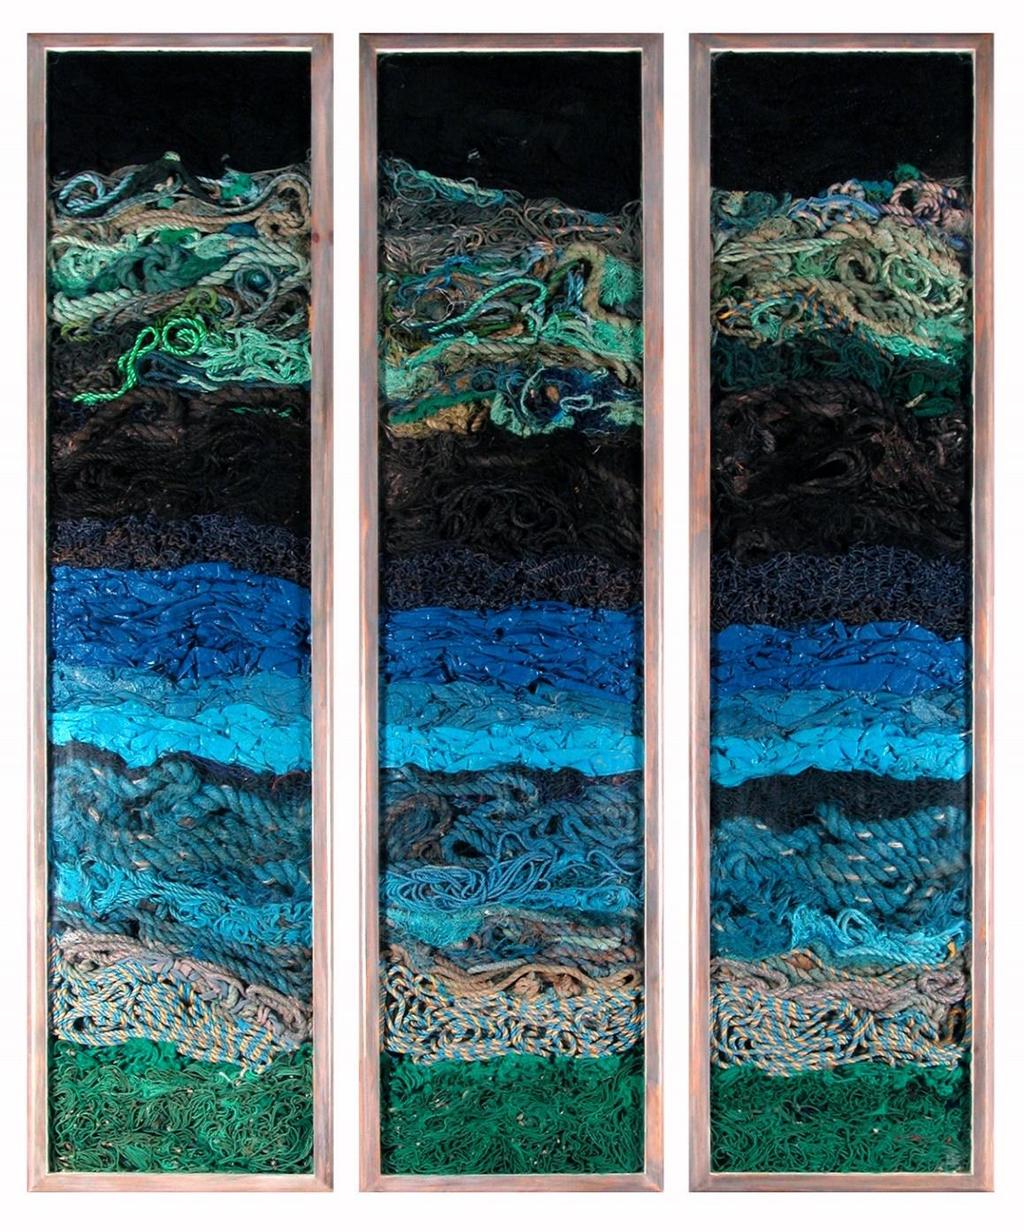 Image 2 John Dahlsen Blue rope, 2003 Found plastic objects, assembled behind perspex Triptych each panel 165 cm x 44 cm John Dahlsen is an Australian artist who worked as a traditional landscape